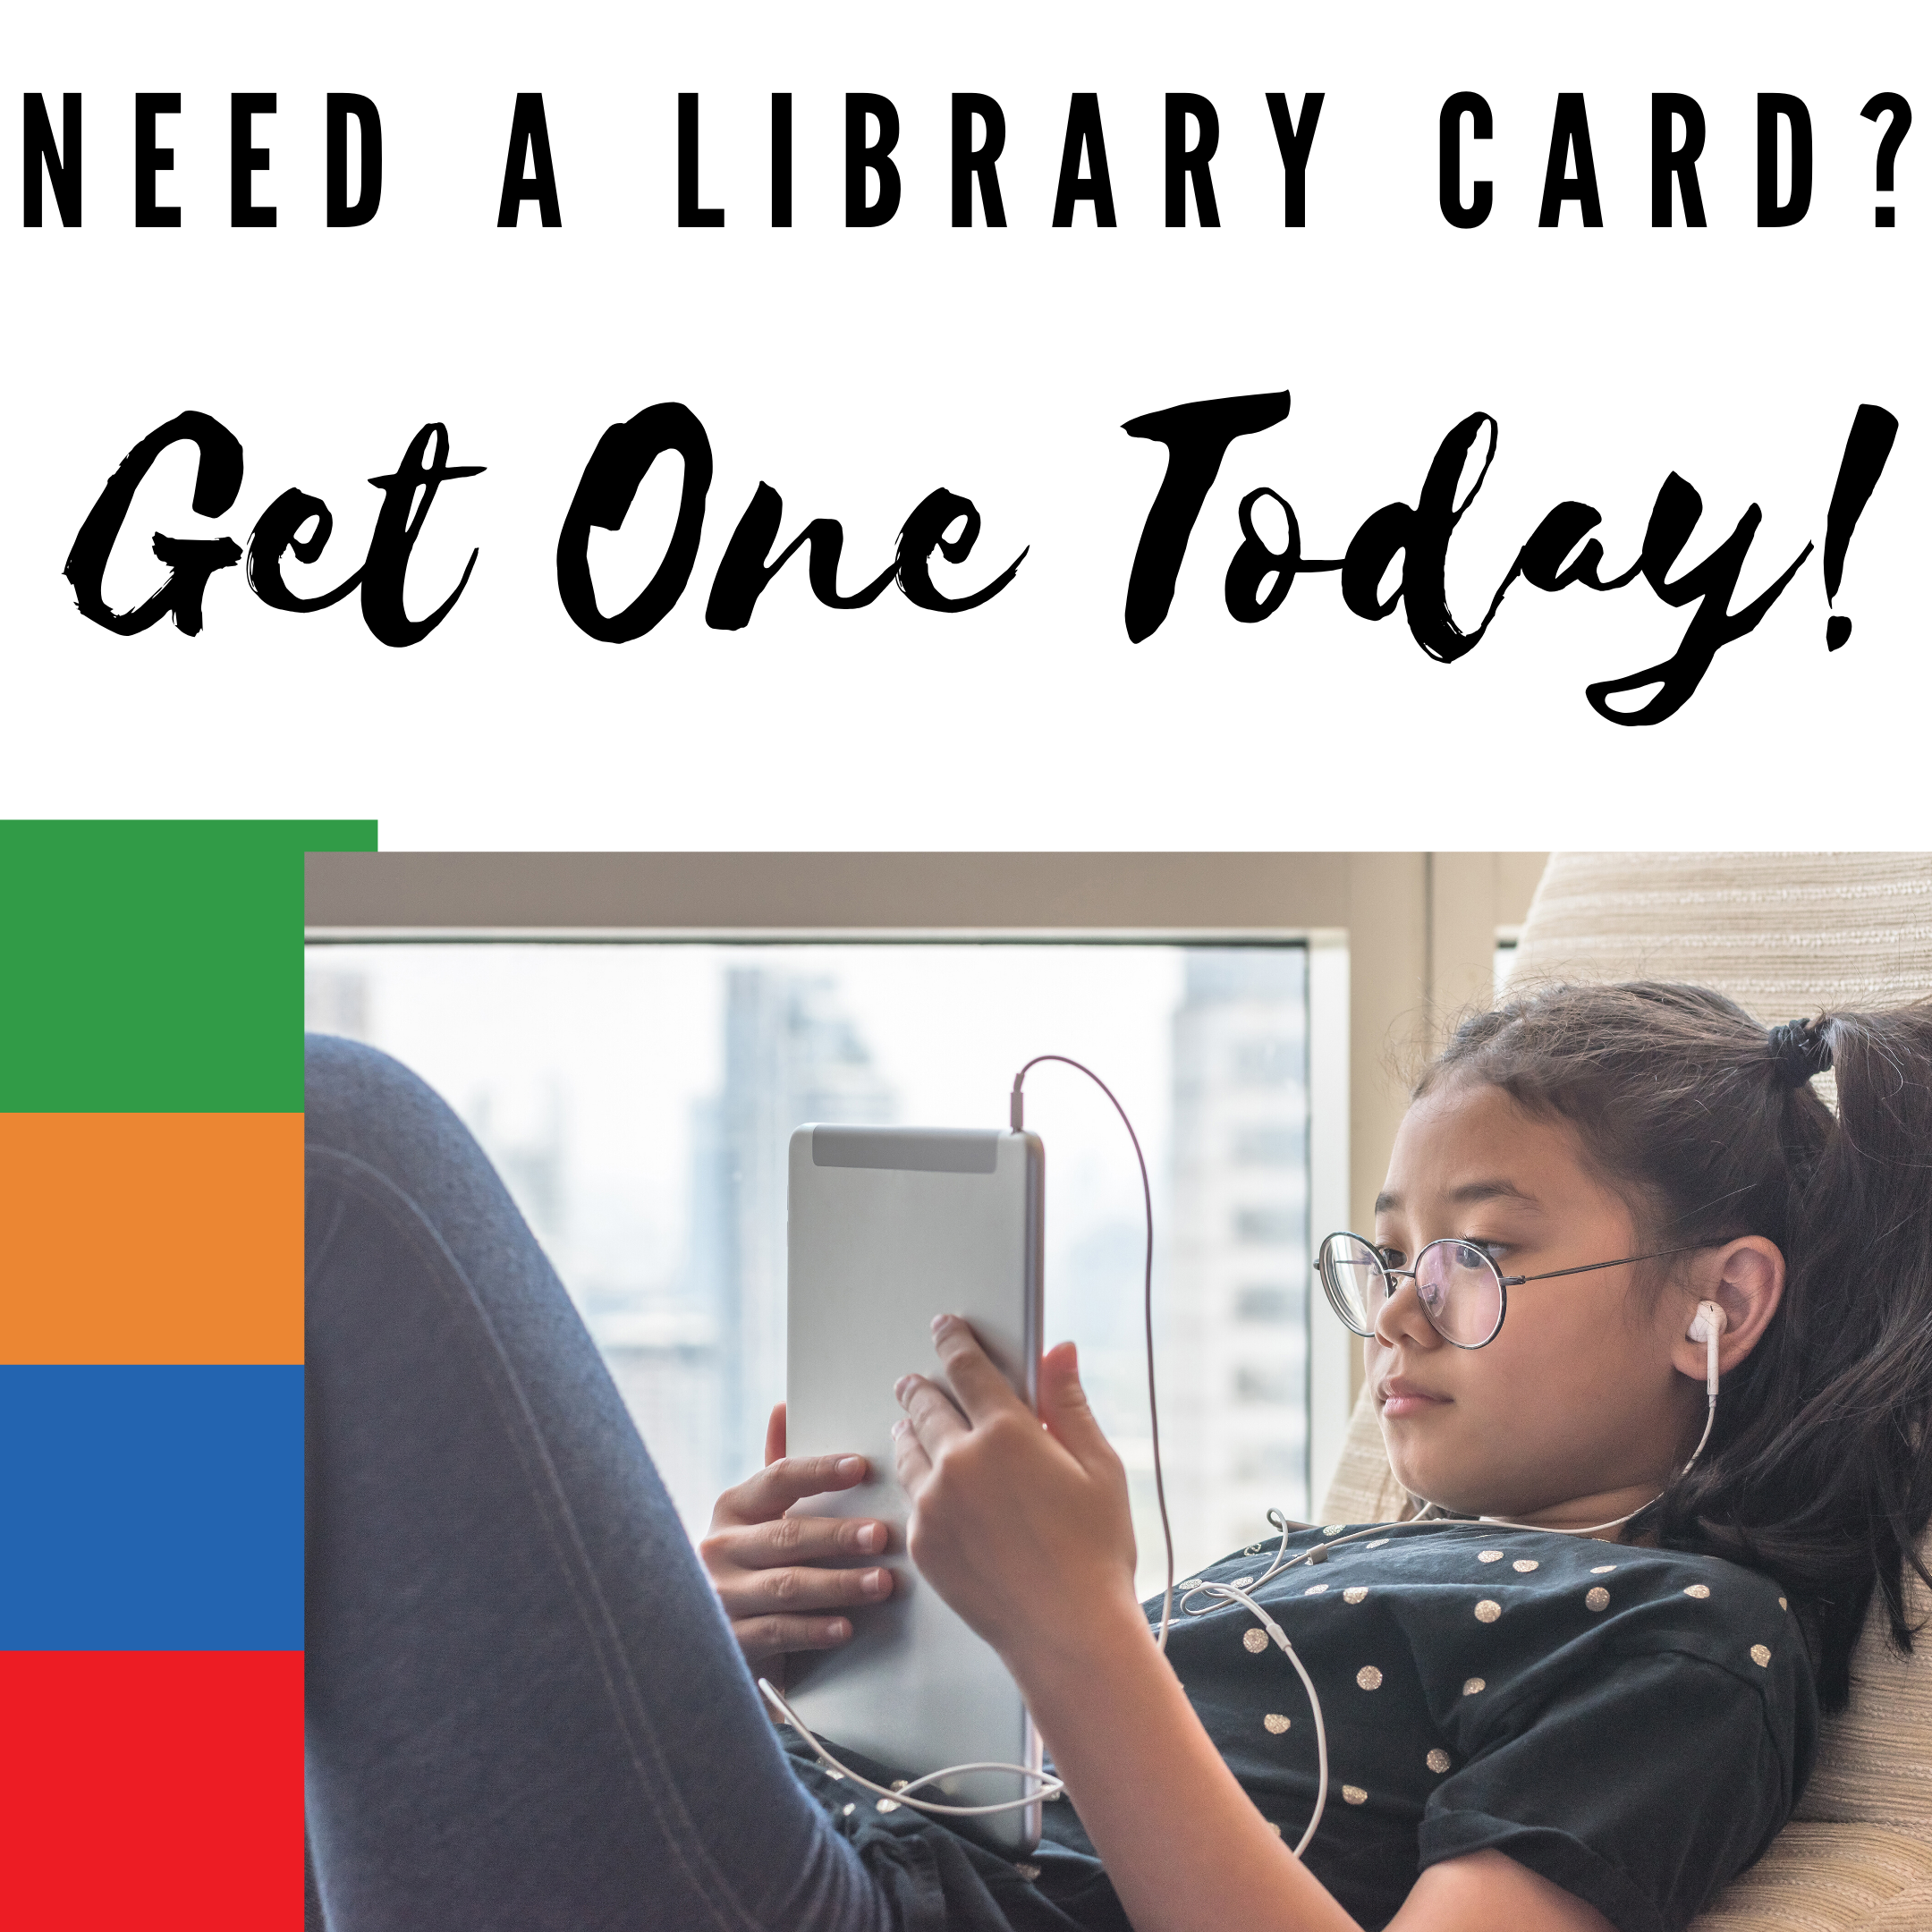 Need a library card? Get one today!